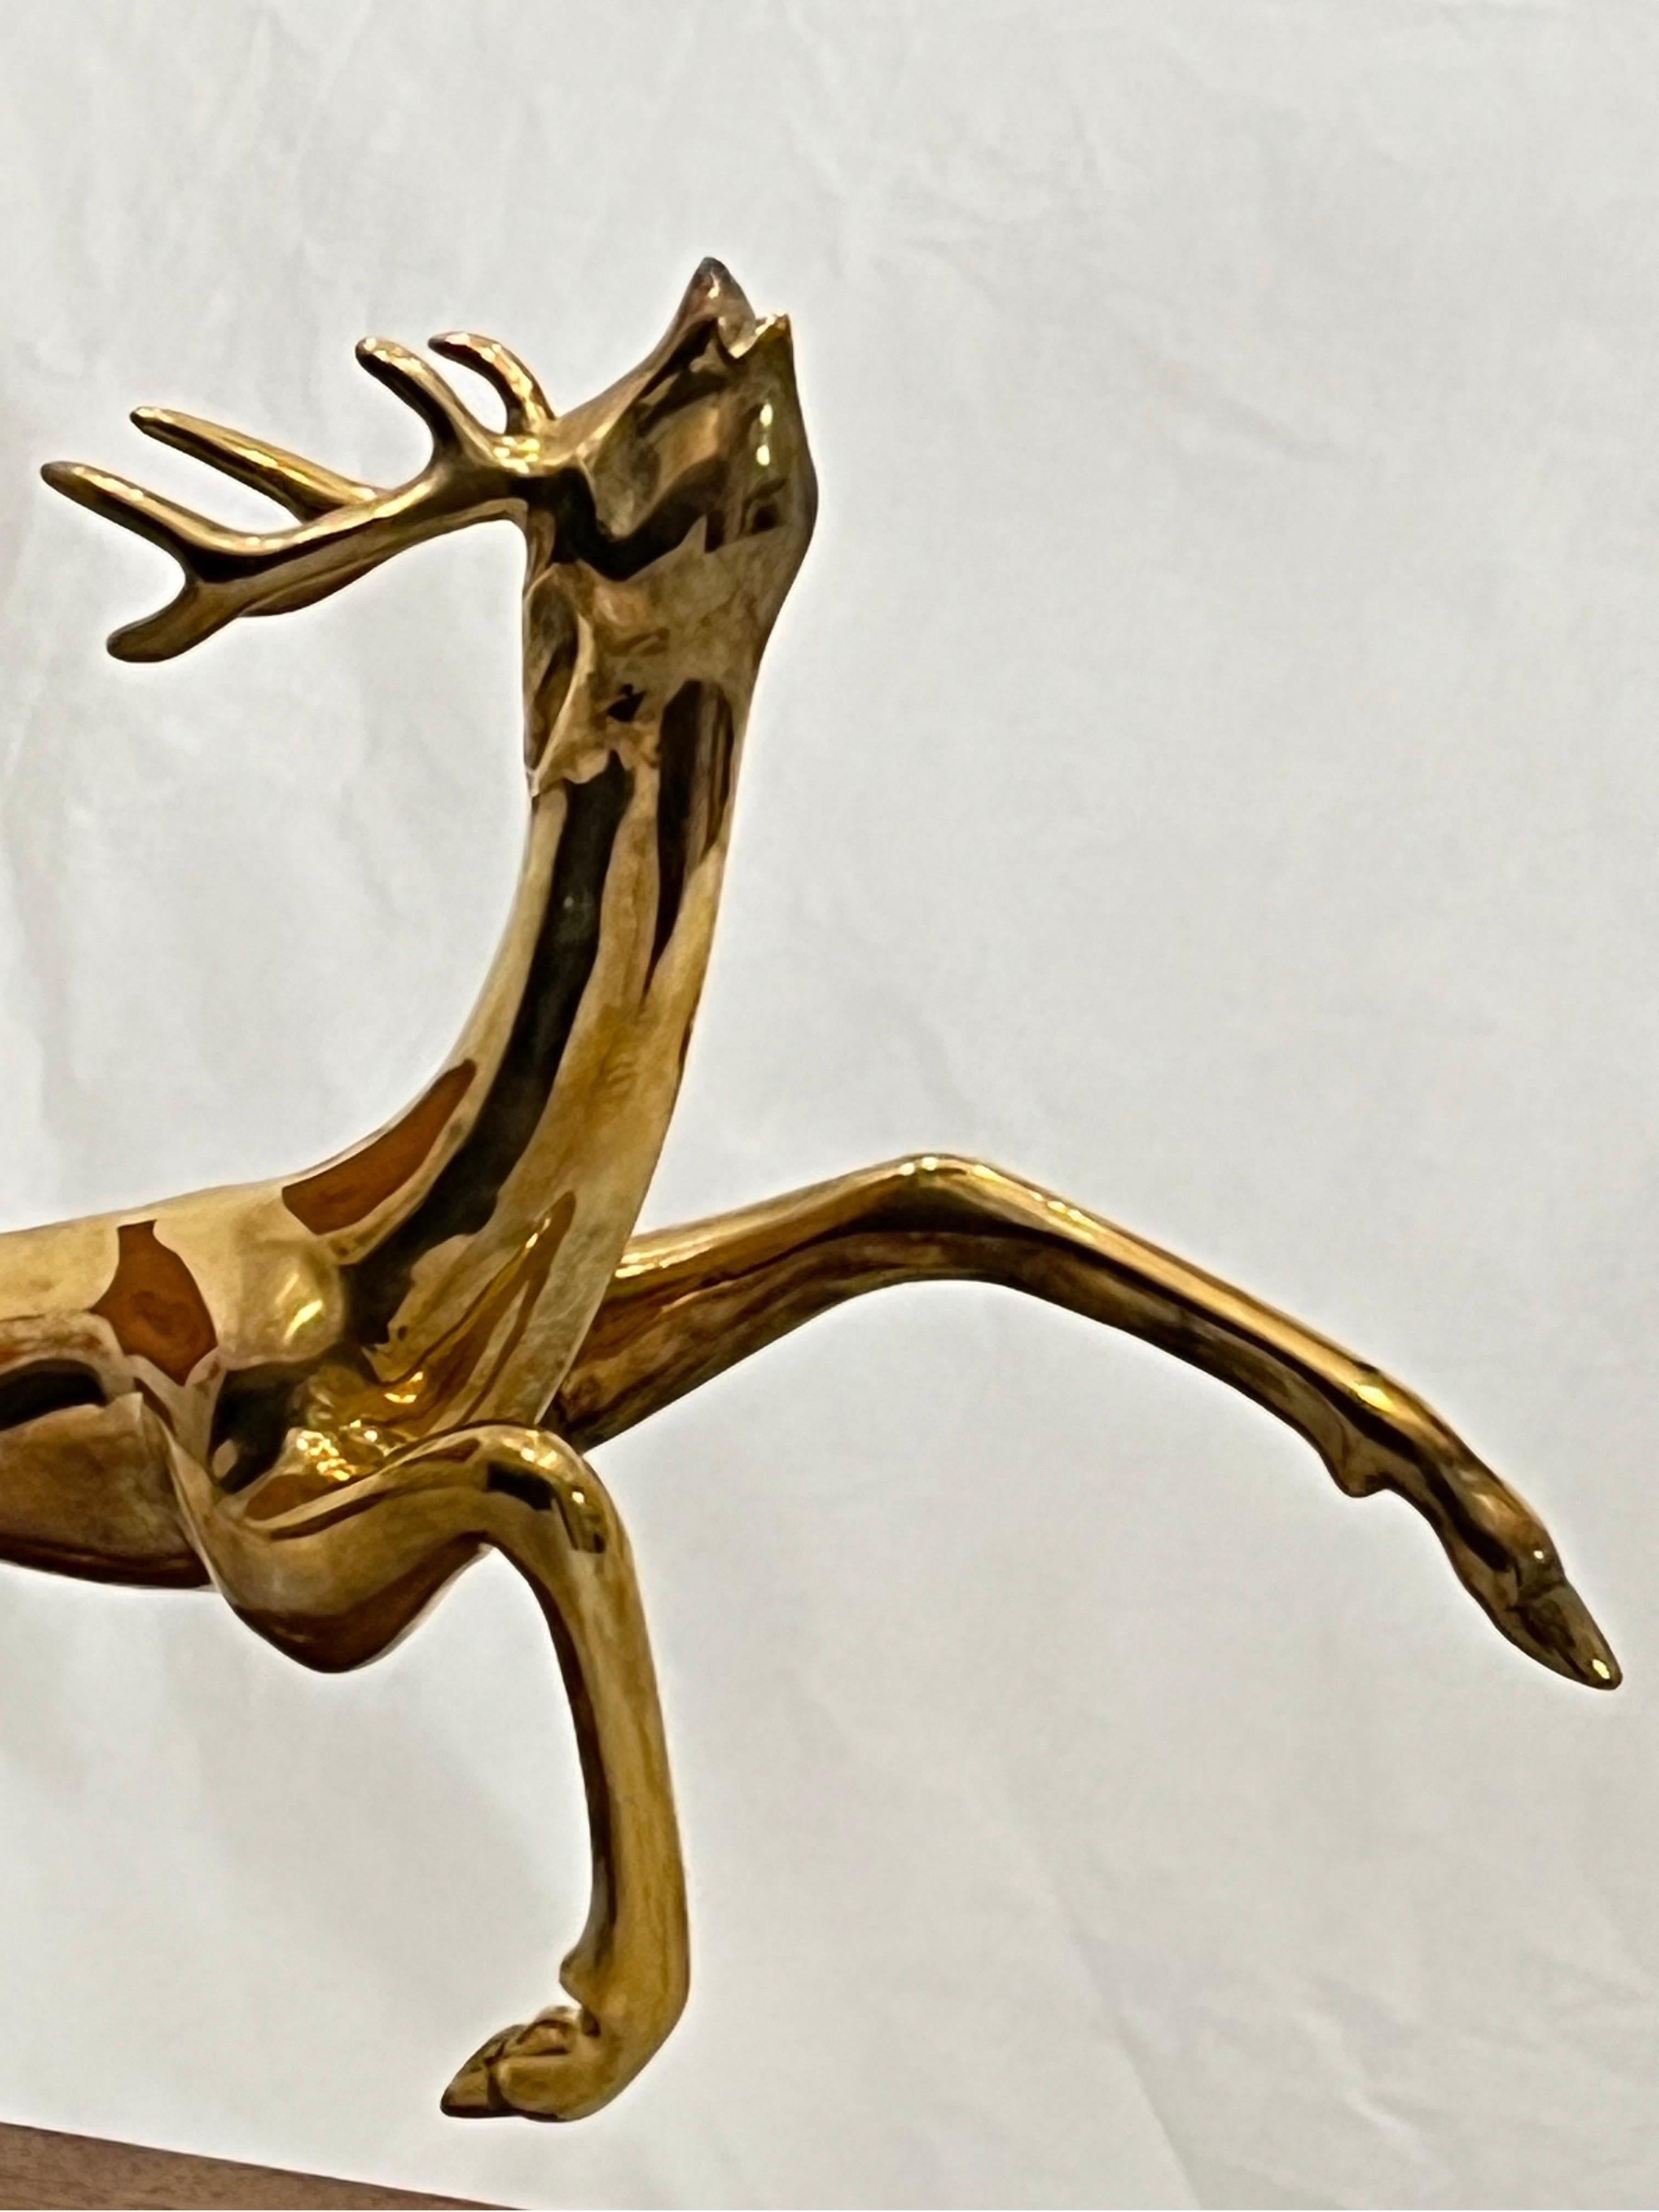 Vintage Thai Somchai Hattakitkosol Signed Solid Bronze Sculpture of Leaping Deer For Sale 9